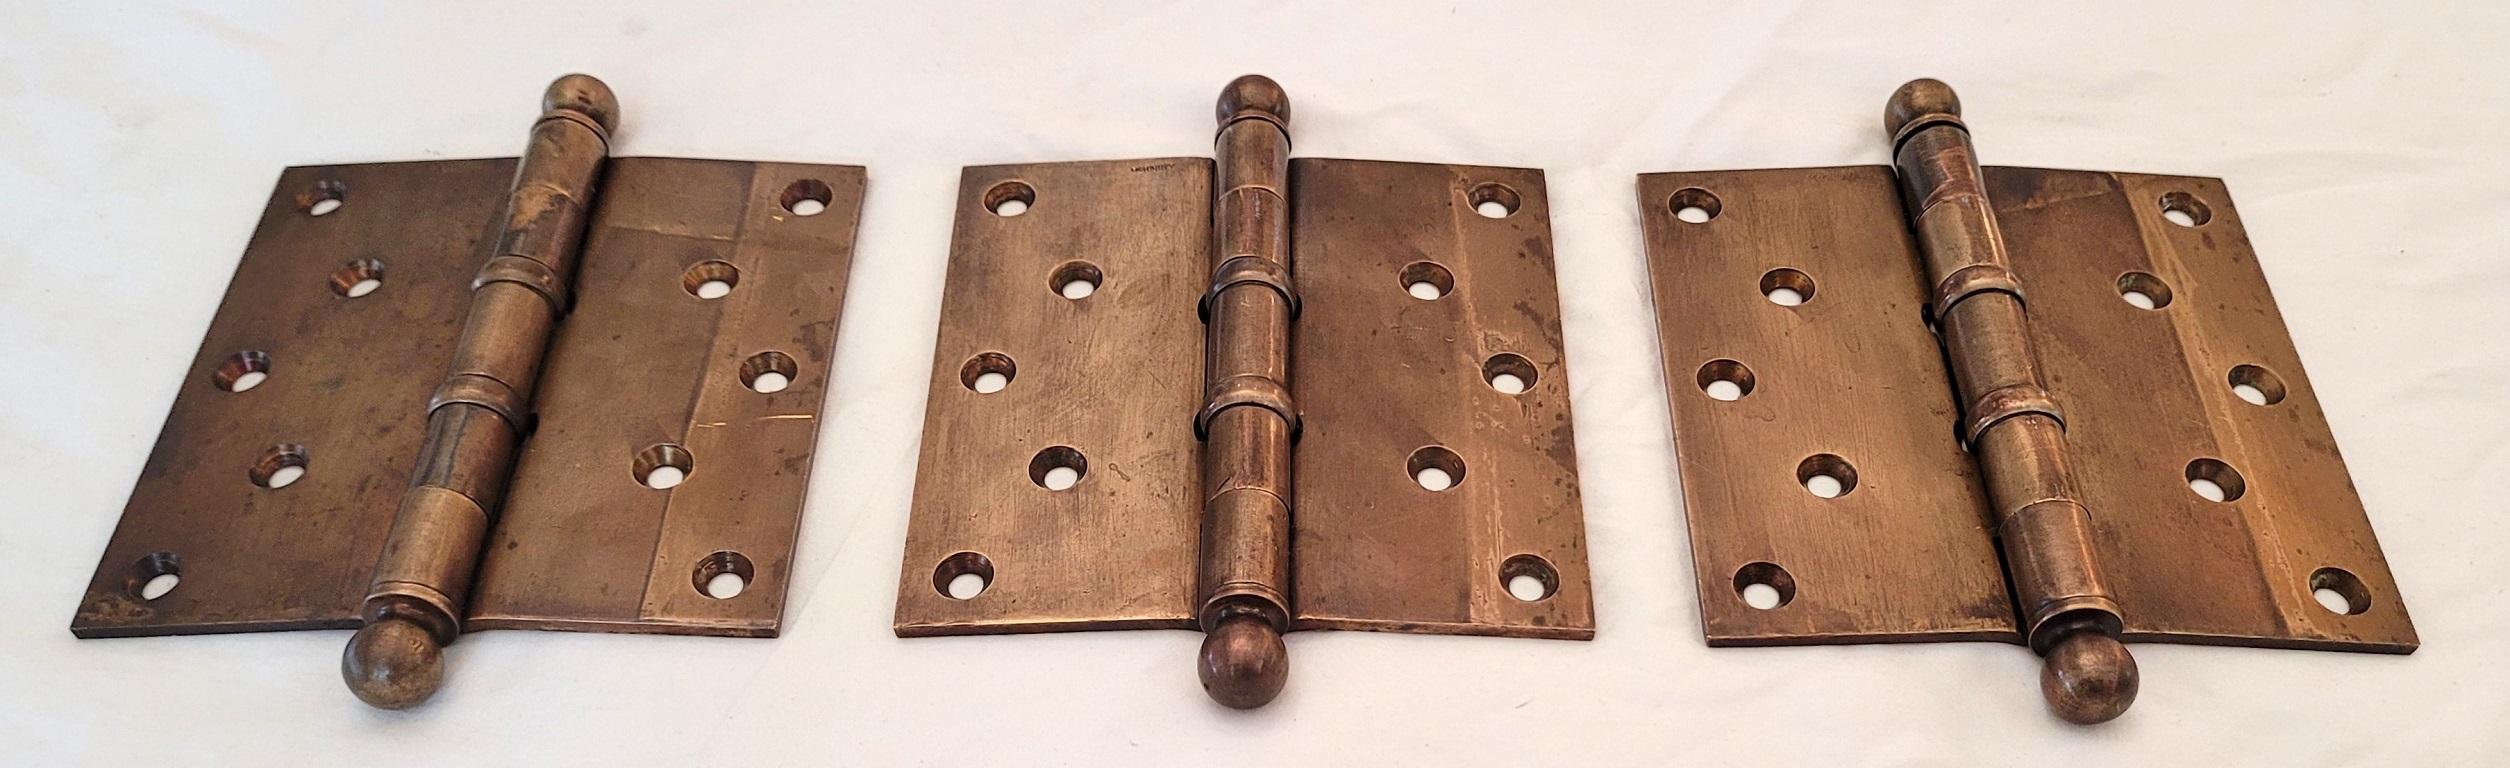 Presenting a fabulous set of 3 1920s McKinney antique brass 5in door hinges.

Rare survivors!

Made in the USA by ‘McKinney’ circa 1925-29.

These are without doubt from the Art Nouveau/Art Deco Era.

They were salvaged from a Mansion in